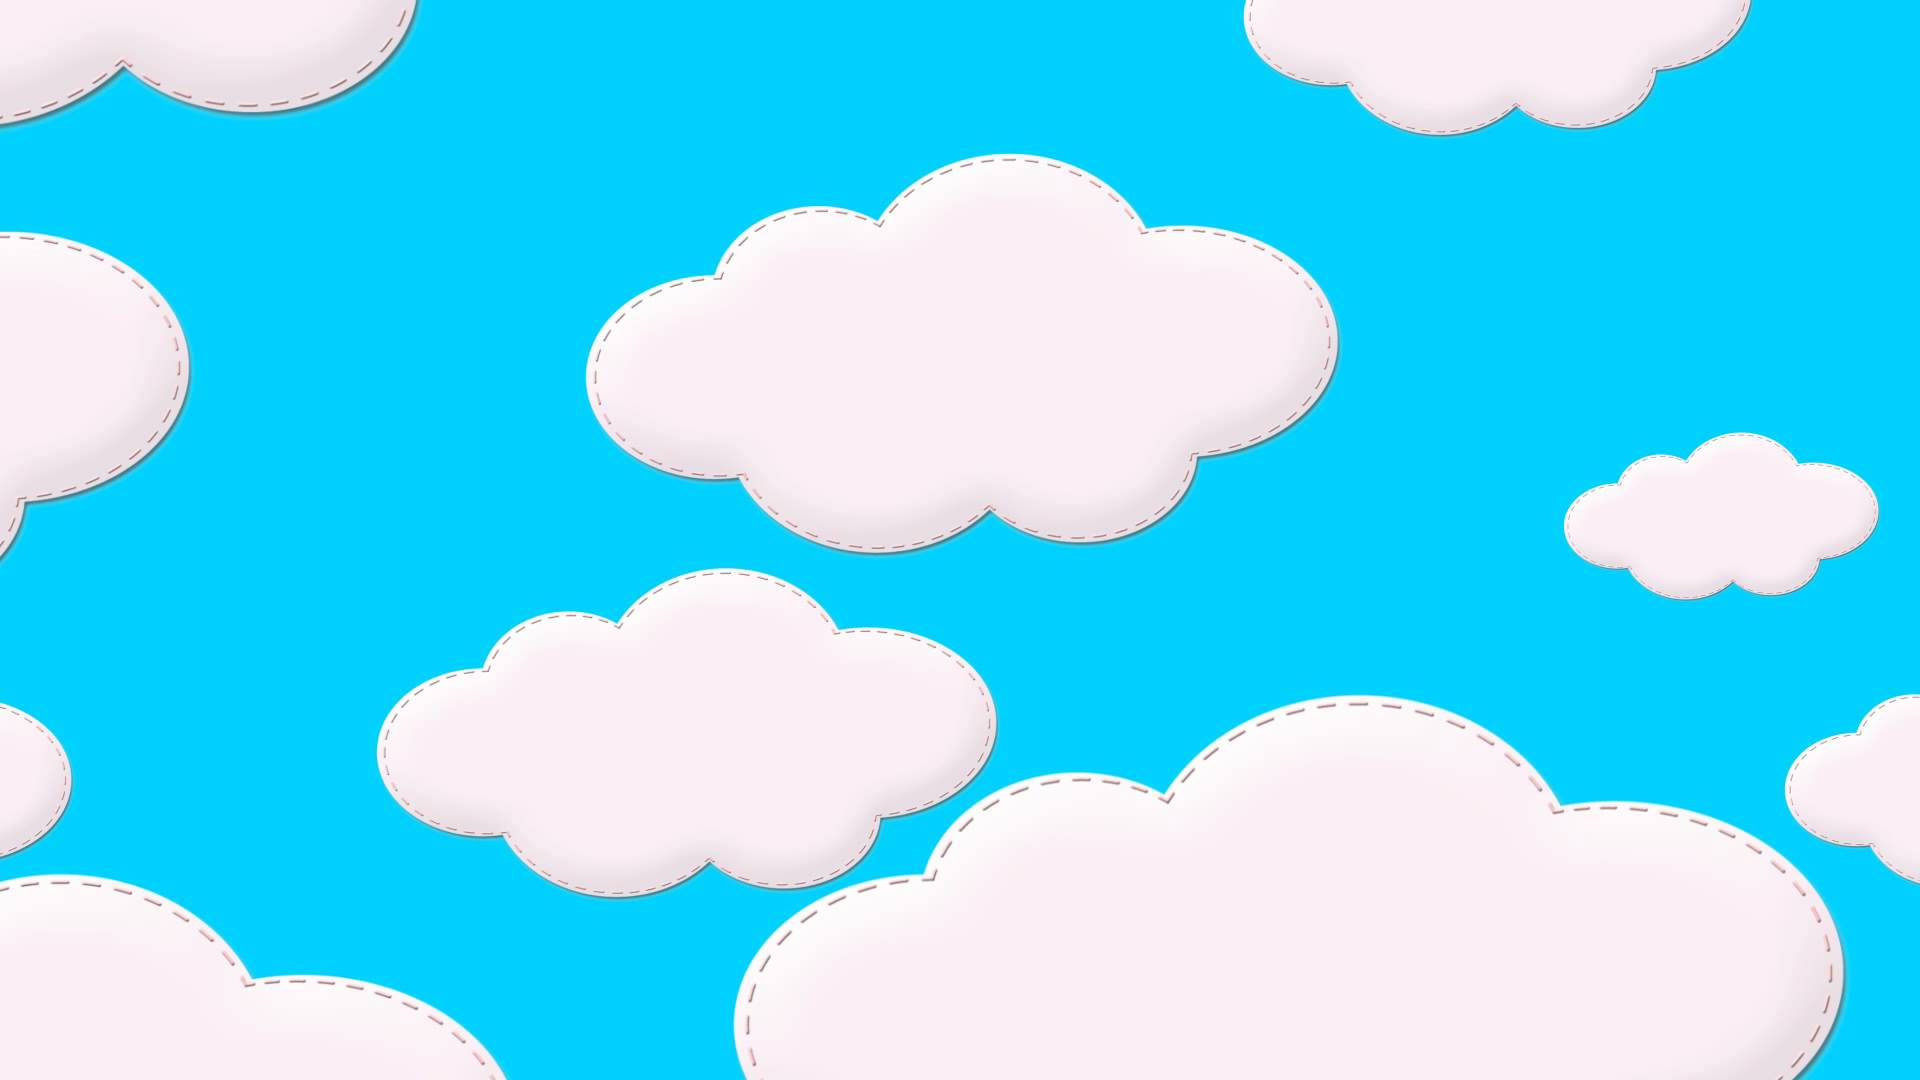 Cartoony Aesthetic Clouds Background